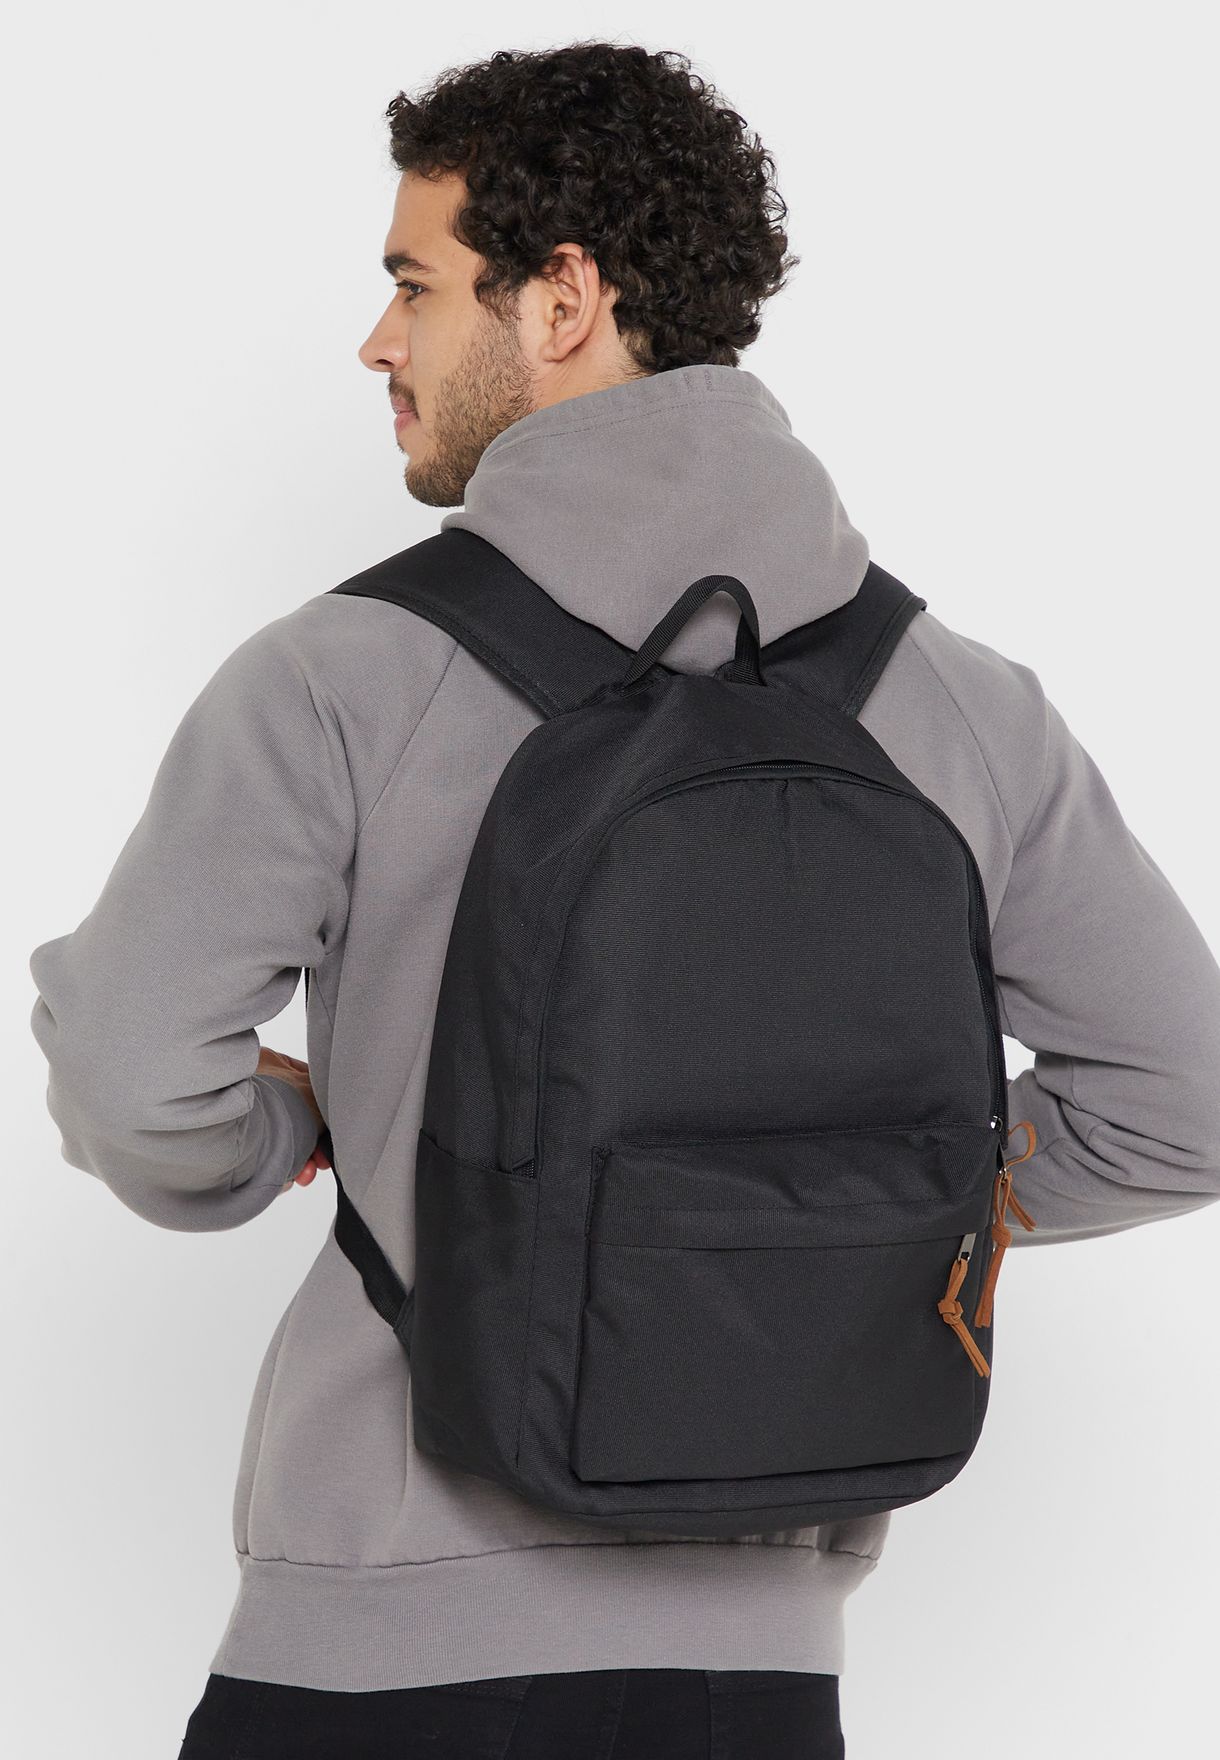 Casual Canvas Backpack With Laptop Sleeve